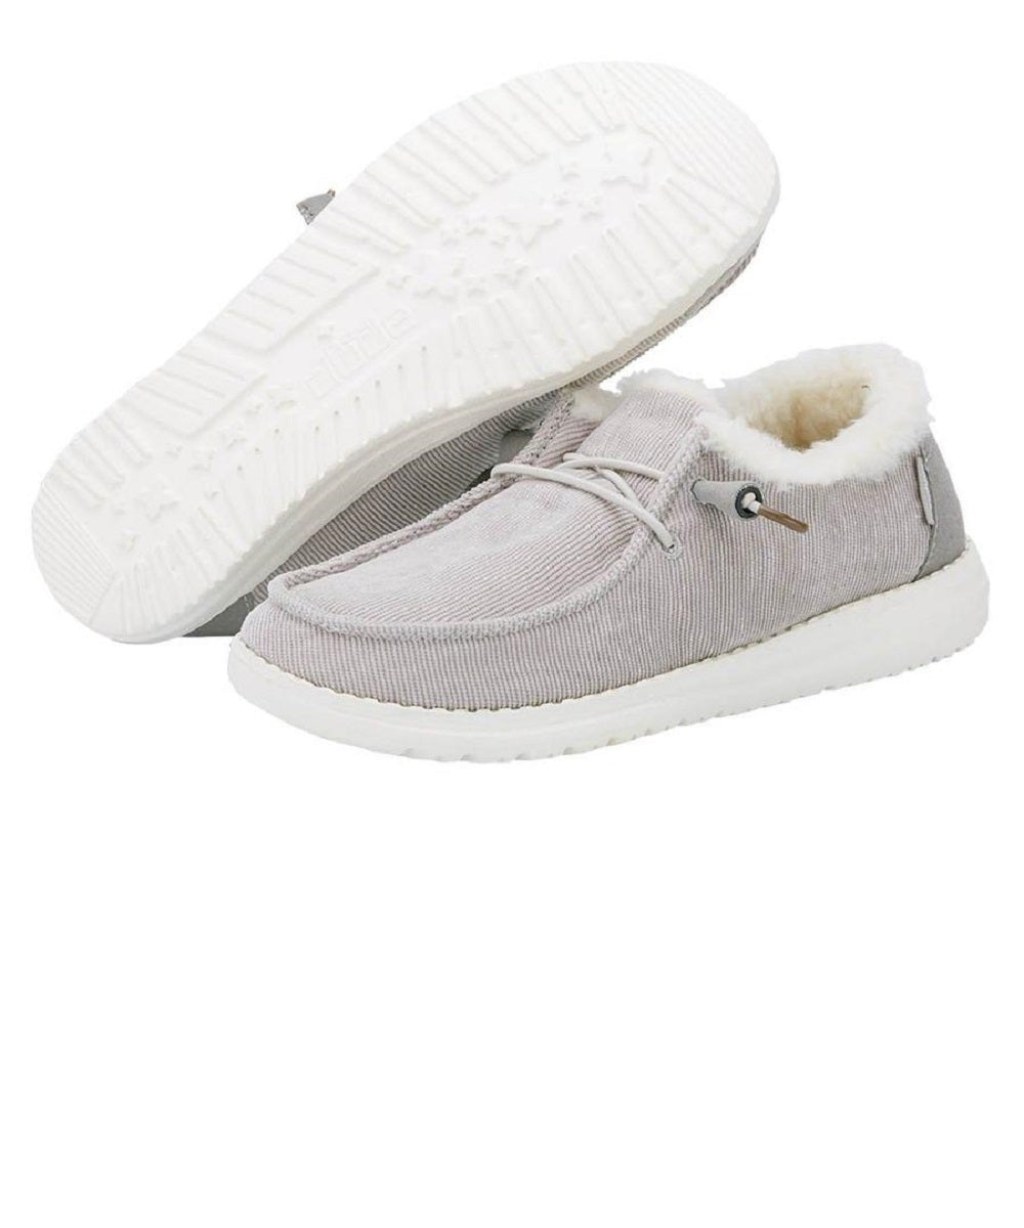 Picture of: Hey Dude Wendy Corduroy Fur Lined Slip-on- Grey